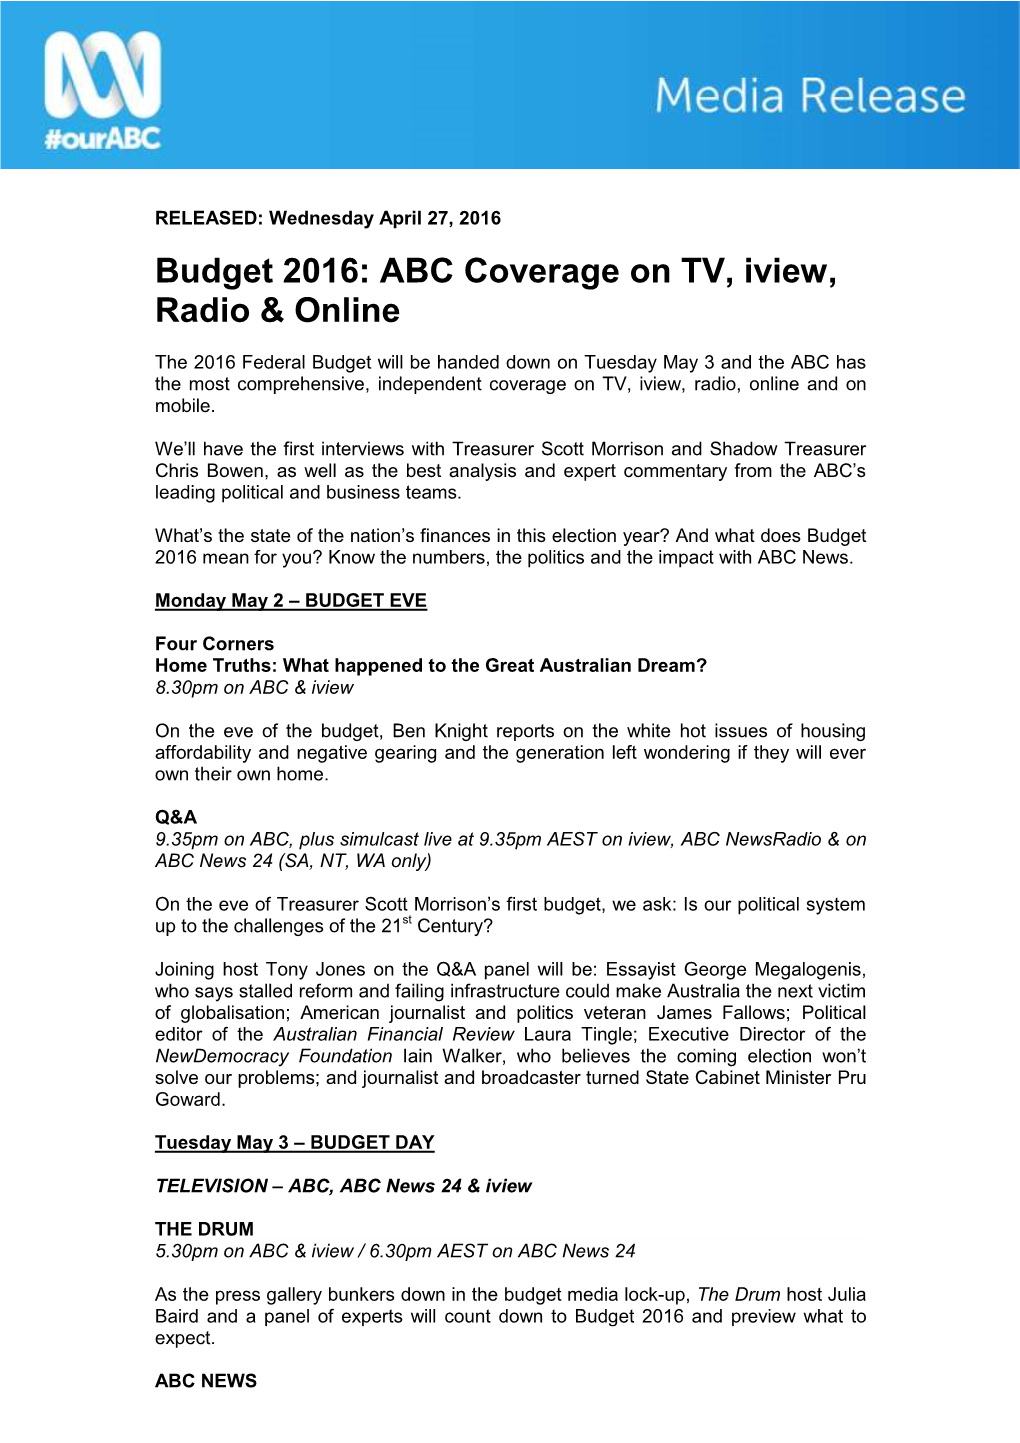 Budget 2016: ABC Coverage on TV, Iview, Radio & Online